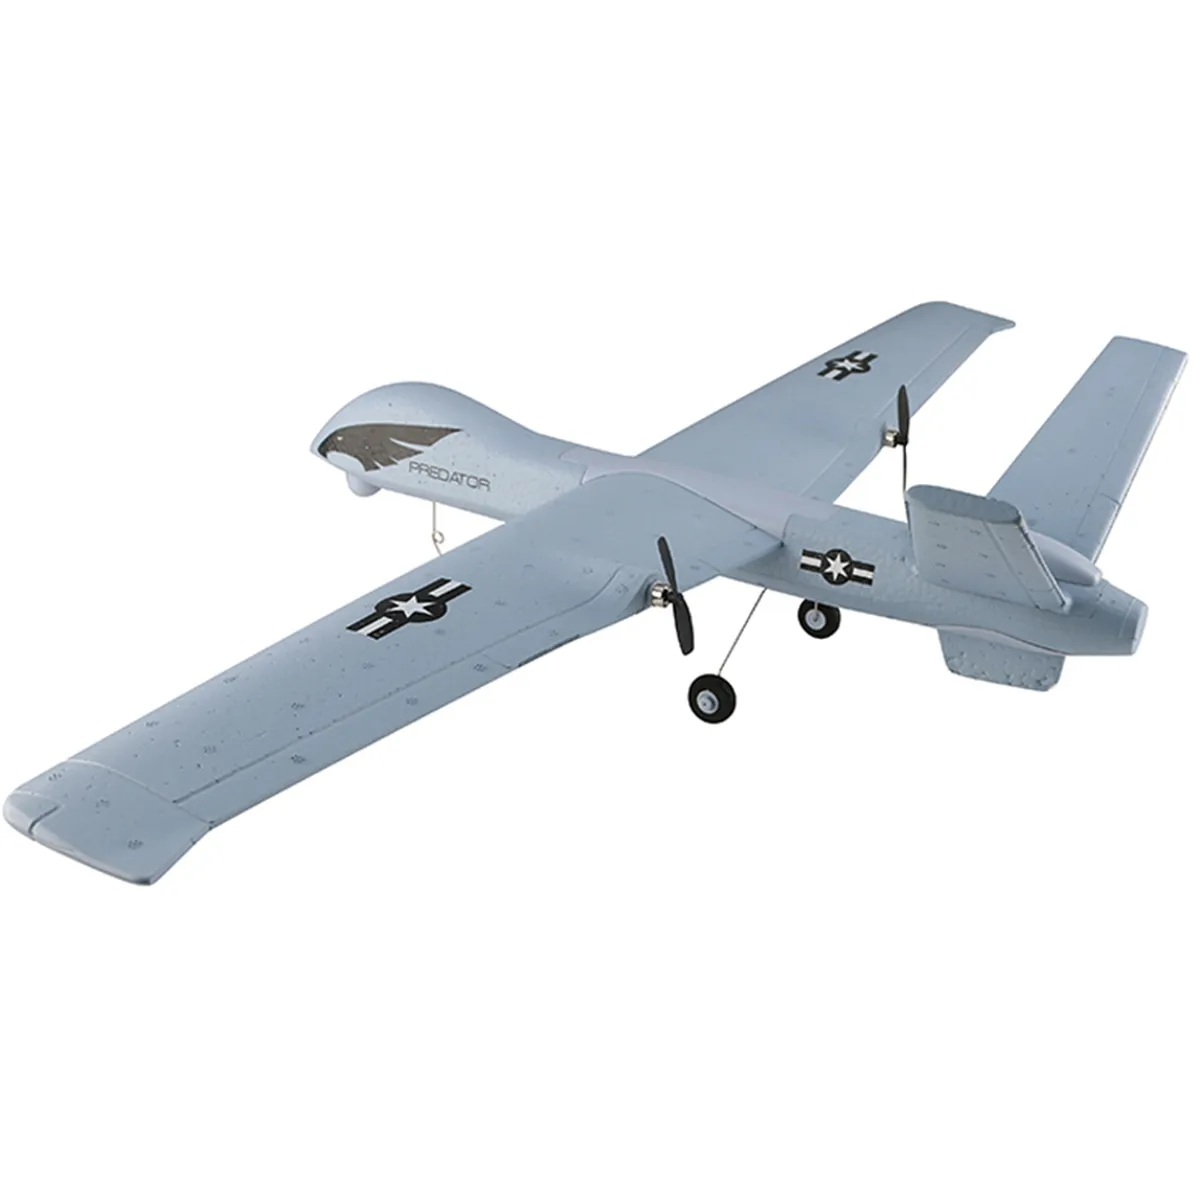 HOSHI RC Airplane Plane Z51 Glider Remote Control 2.4G Flying Model with LED Hand Throwing Wingspan Foam Plane Toys Kids DIY KIT